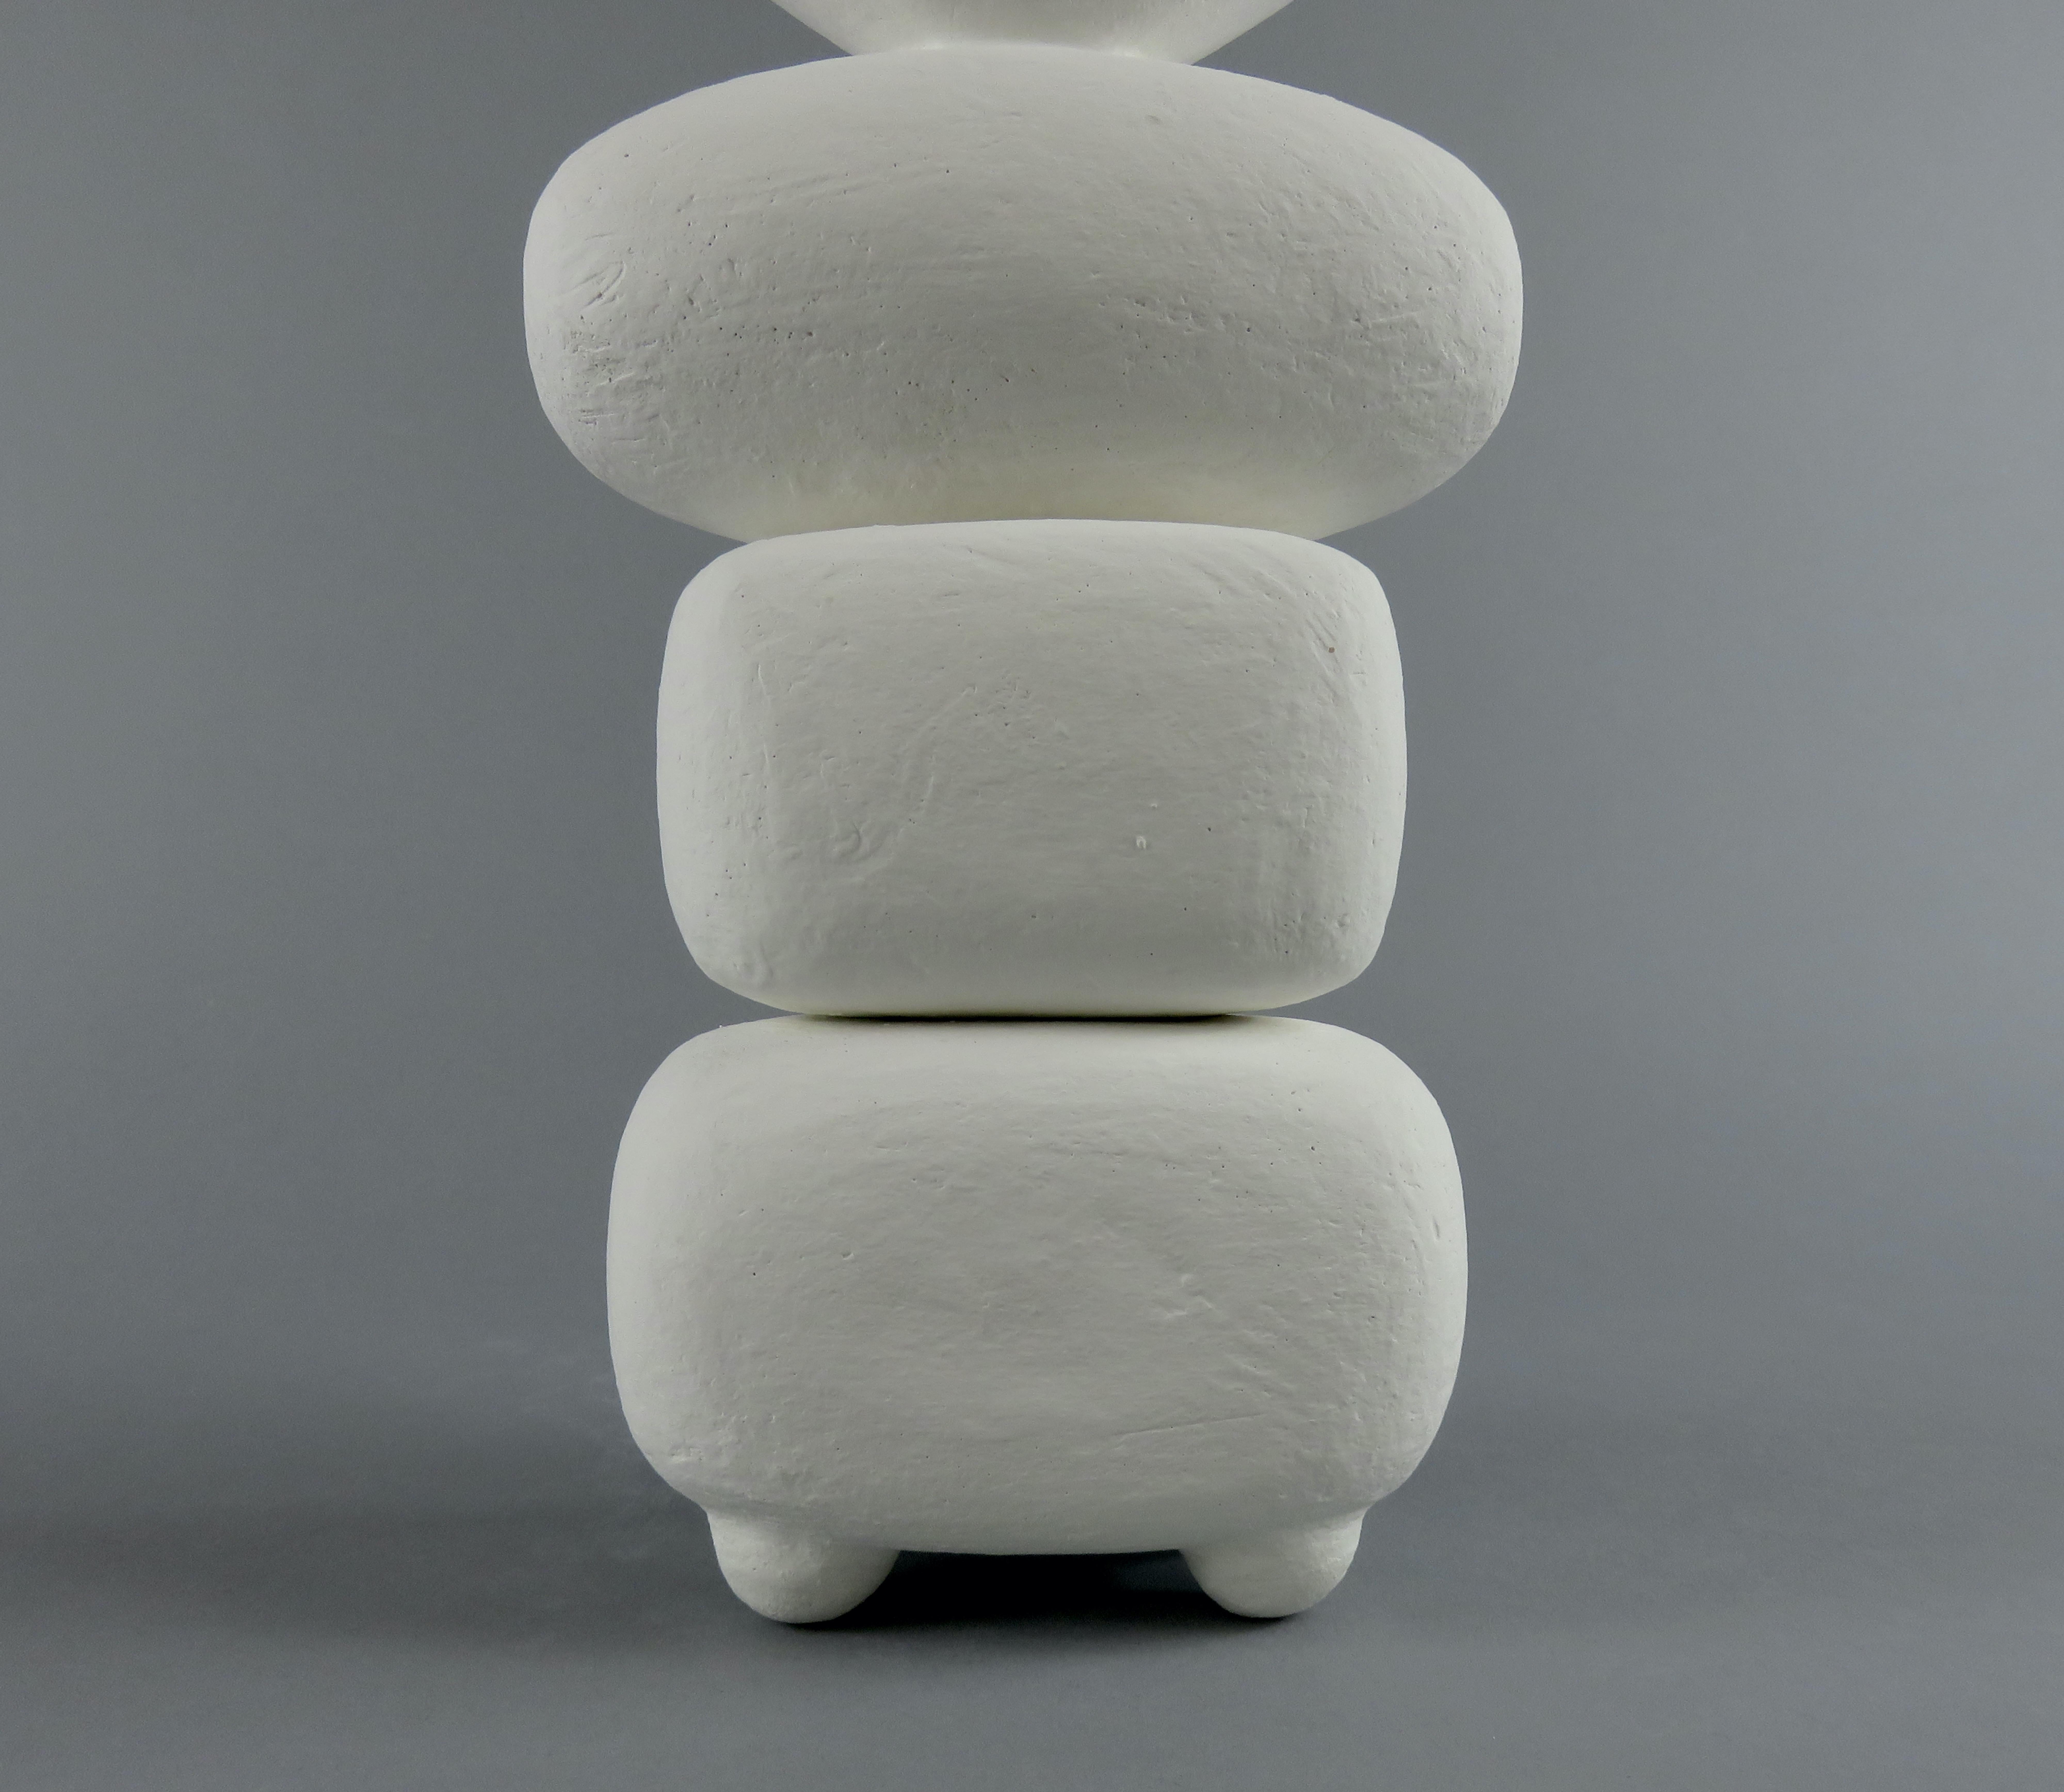 White Winged Crown, 4 Part Ceramic TOTEM, Hand Built Sculpture by H. Starcevic For Sale 2